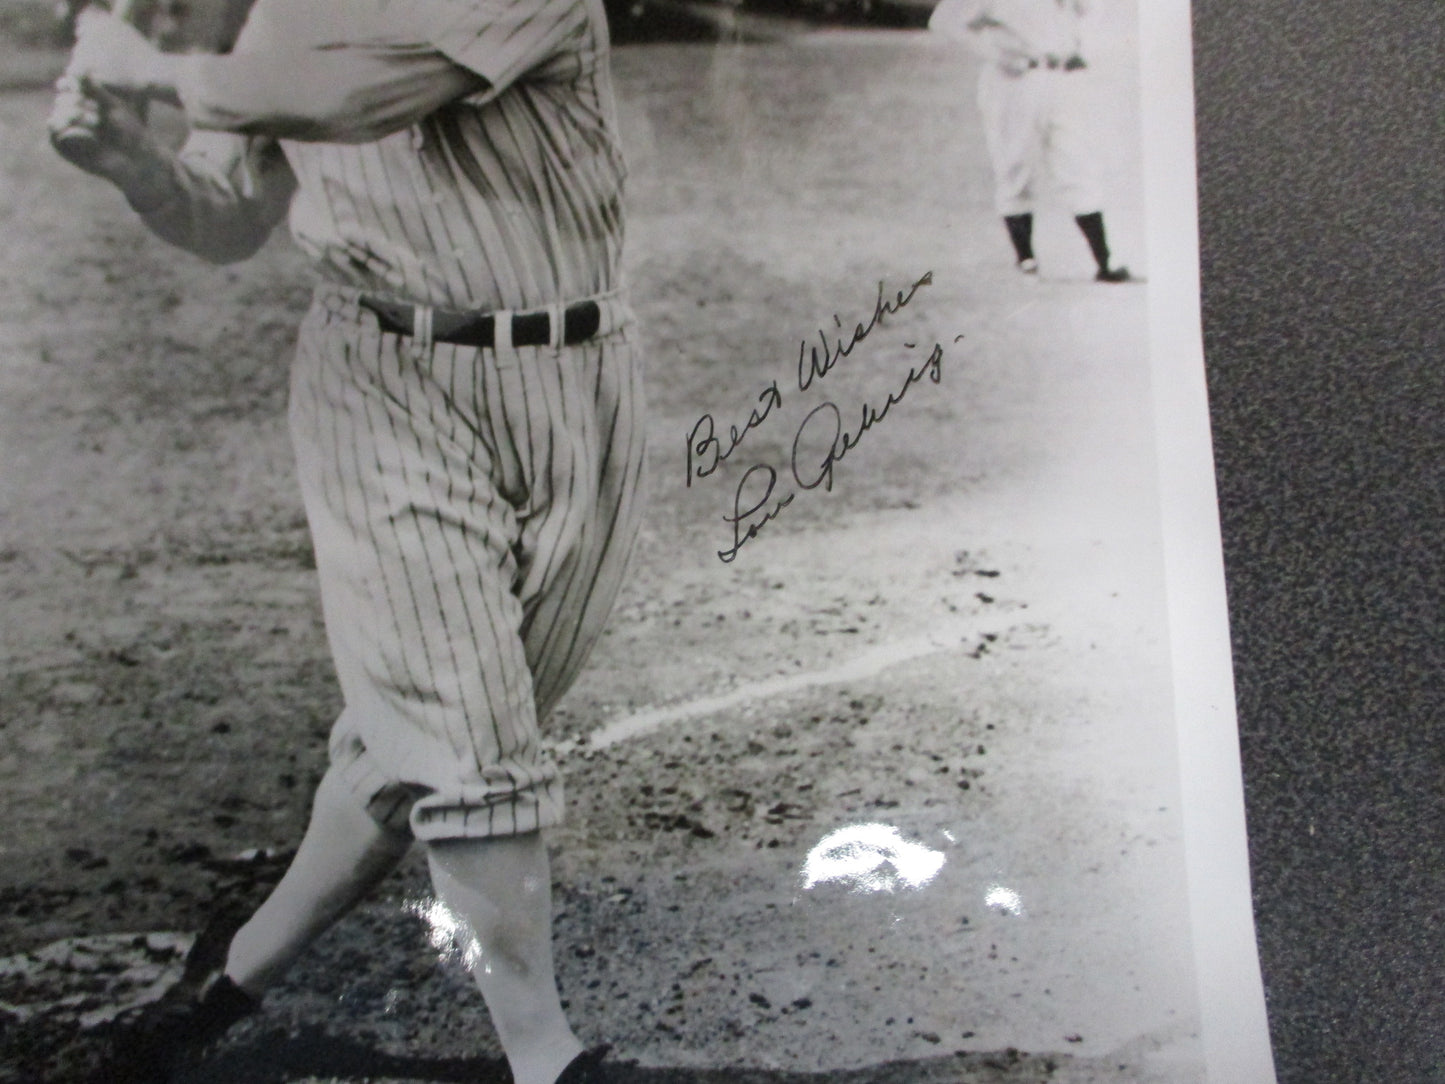 Lou Gehrig Yankees Signed Photo "Best Wishes" 9 1/2" x 8" Circa 1930's